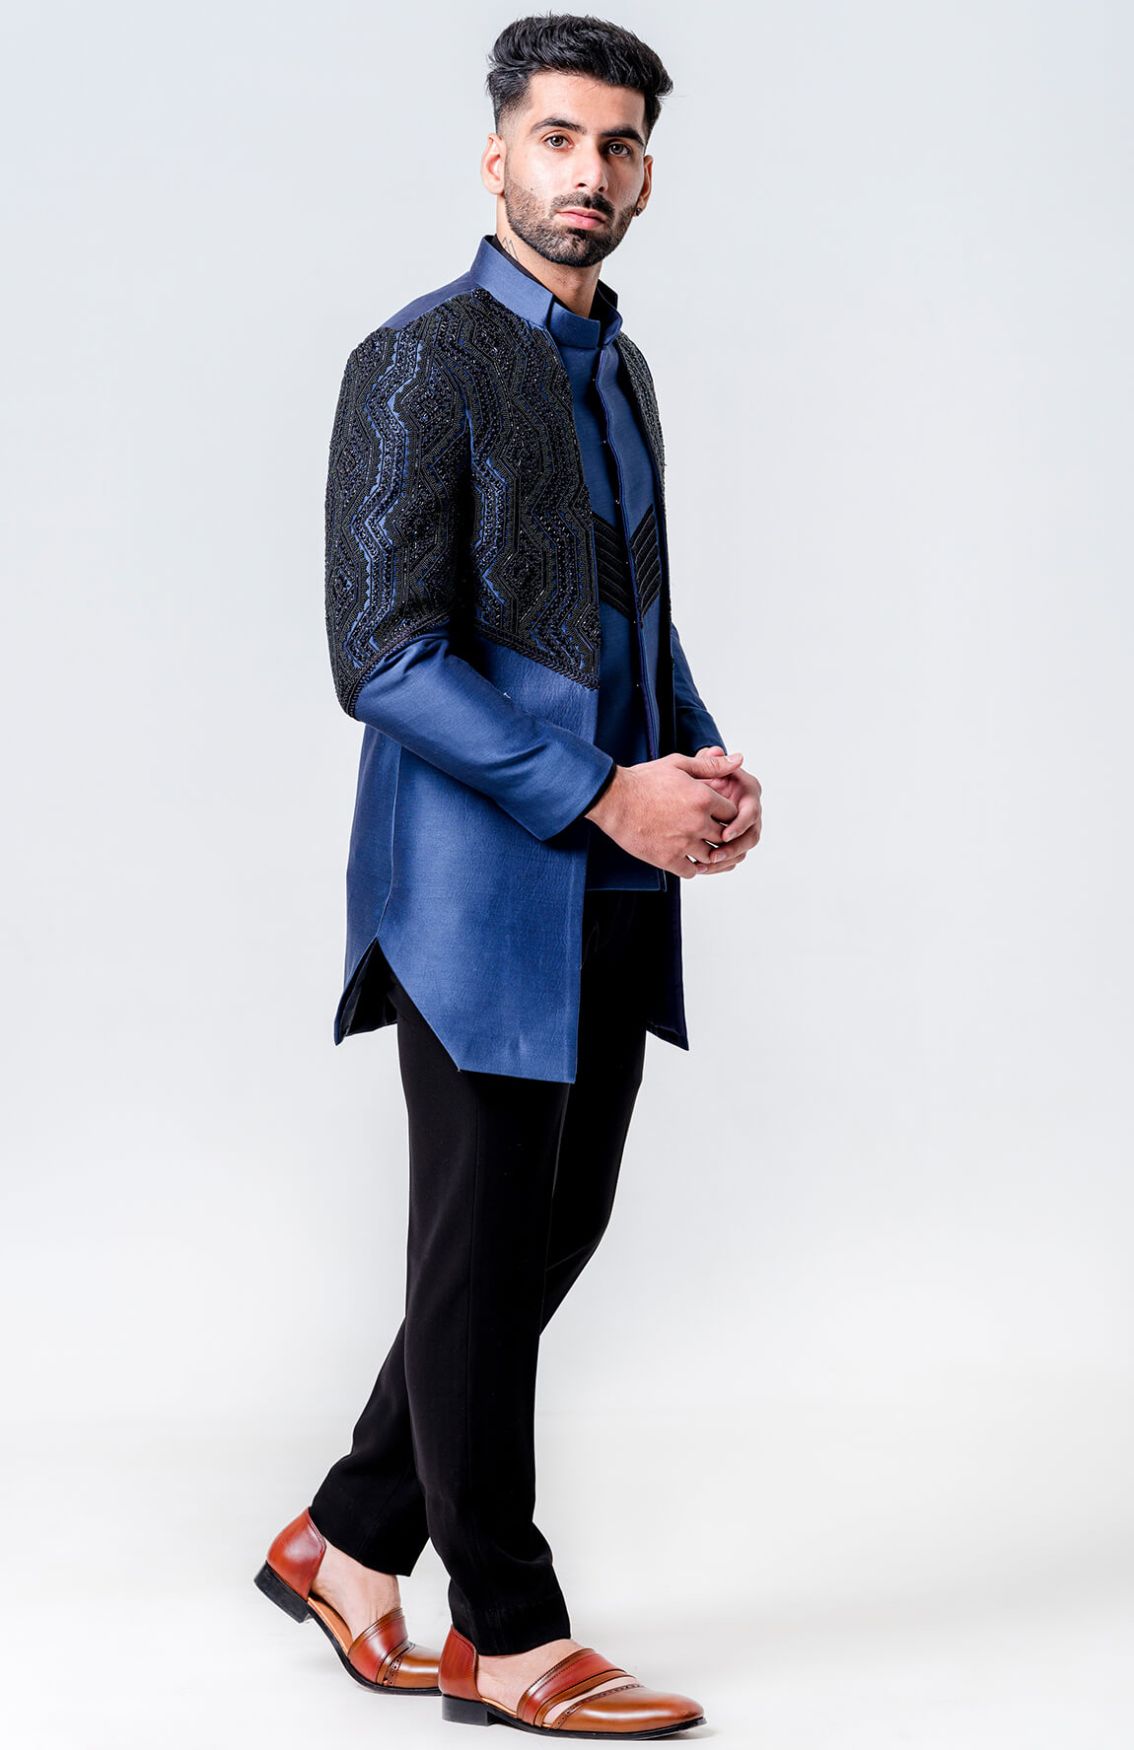 Long Open Jacket Attached Nehru Jacket Paired With Kurta & Trousers